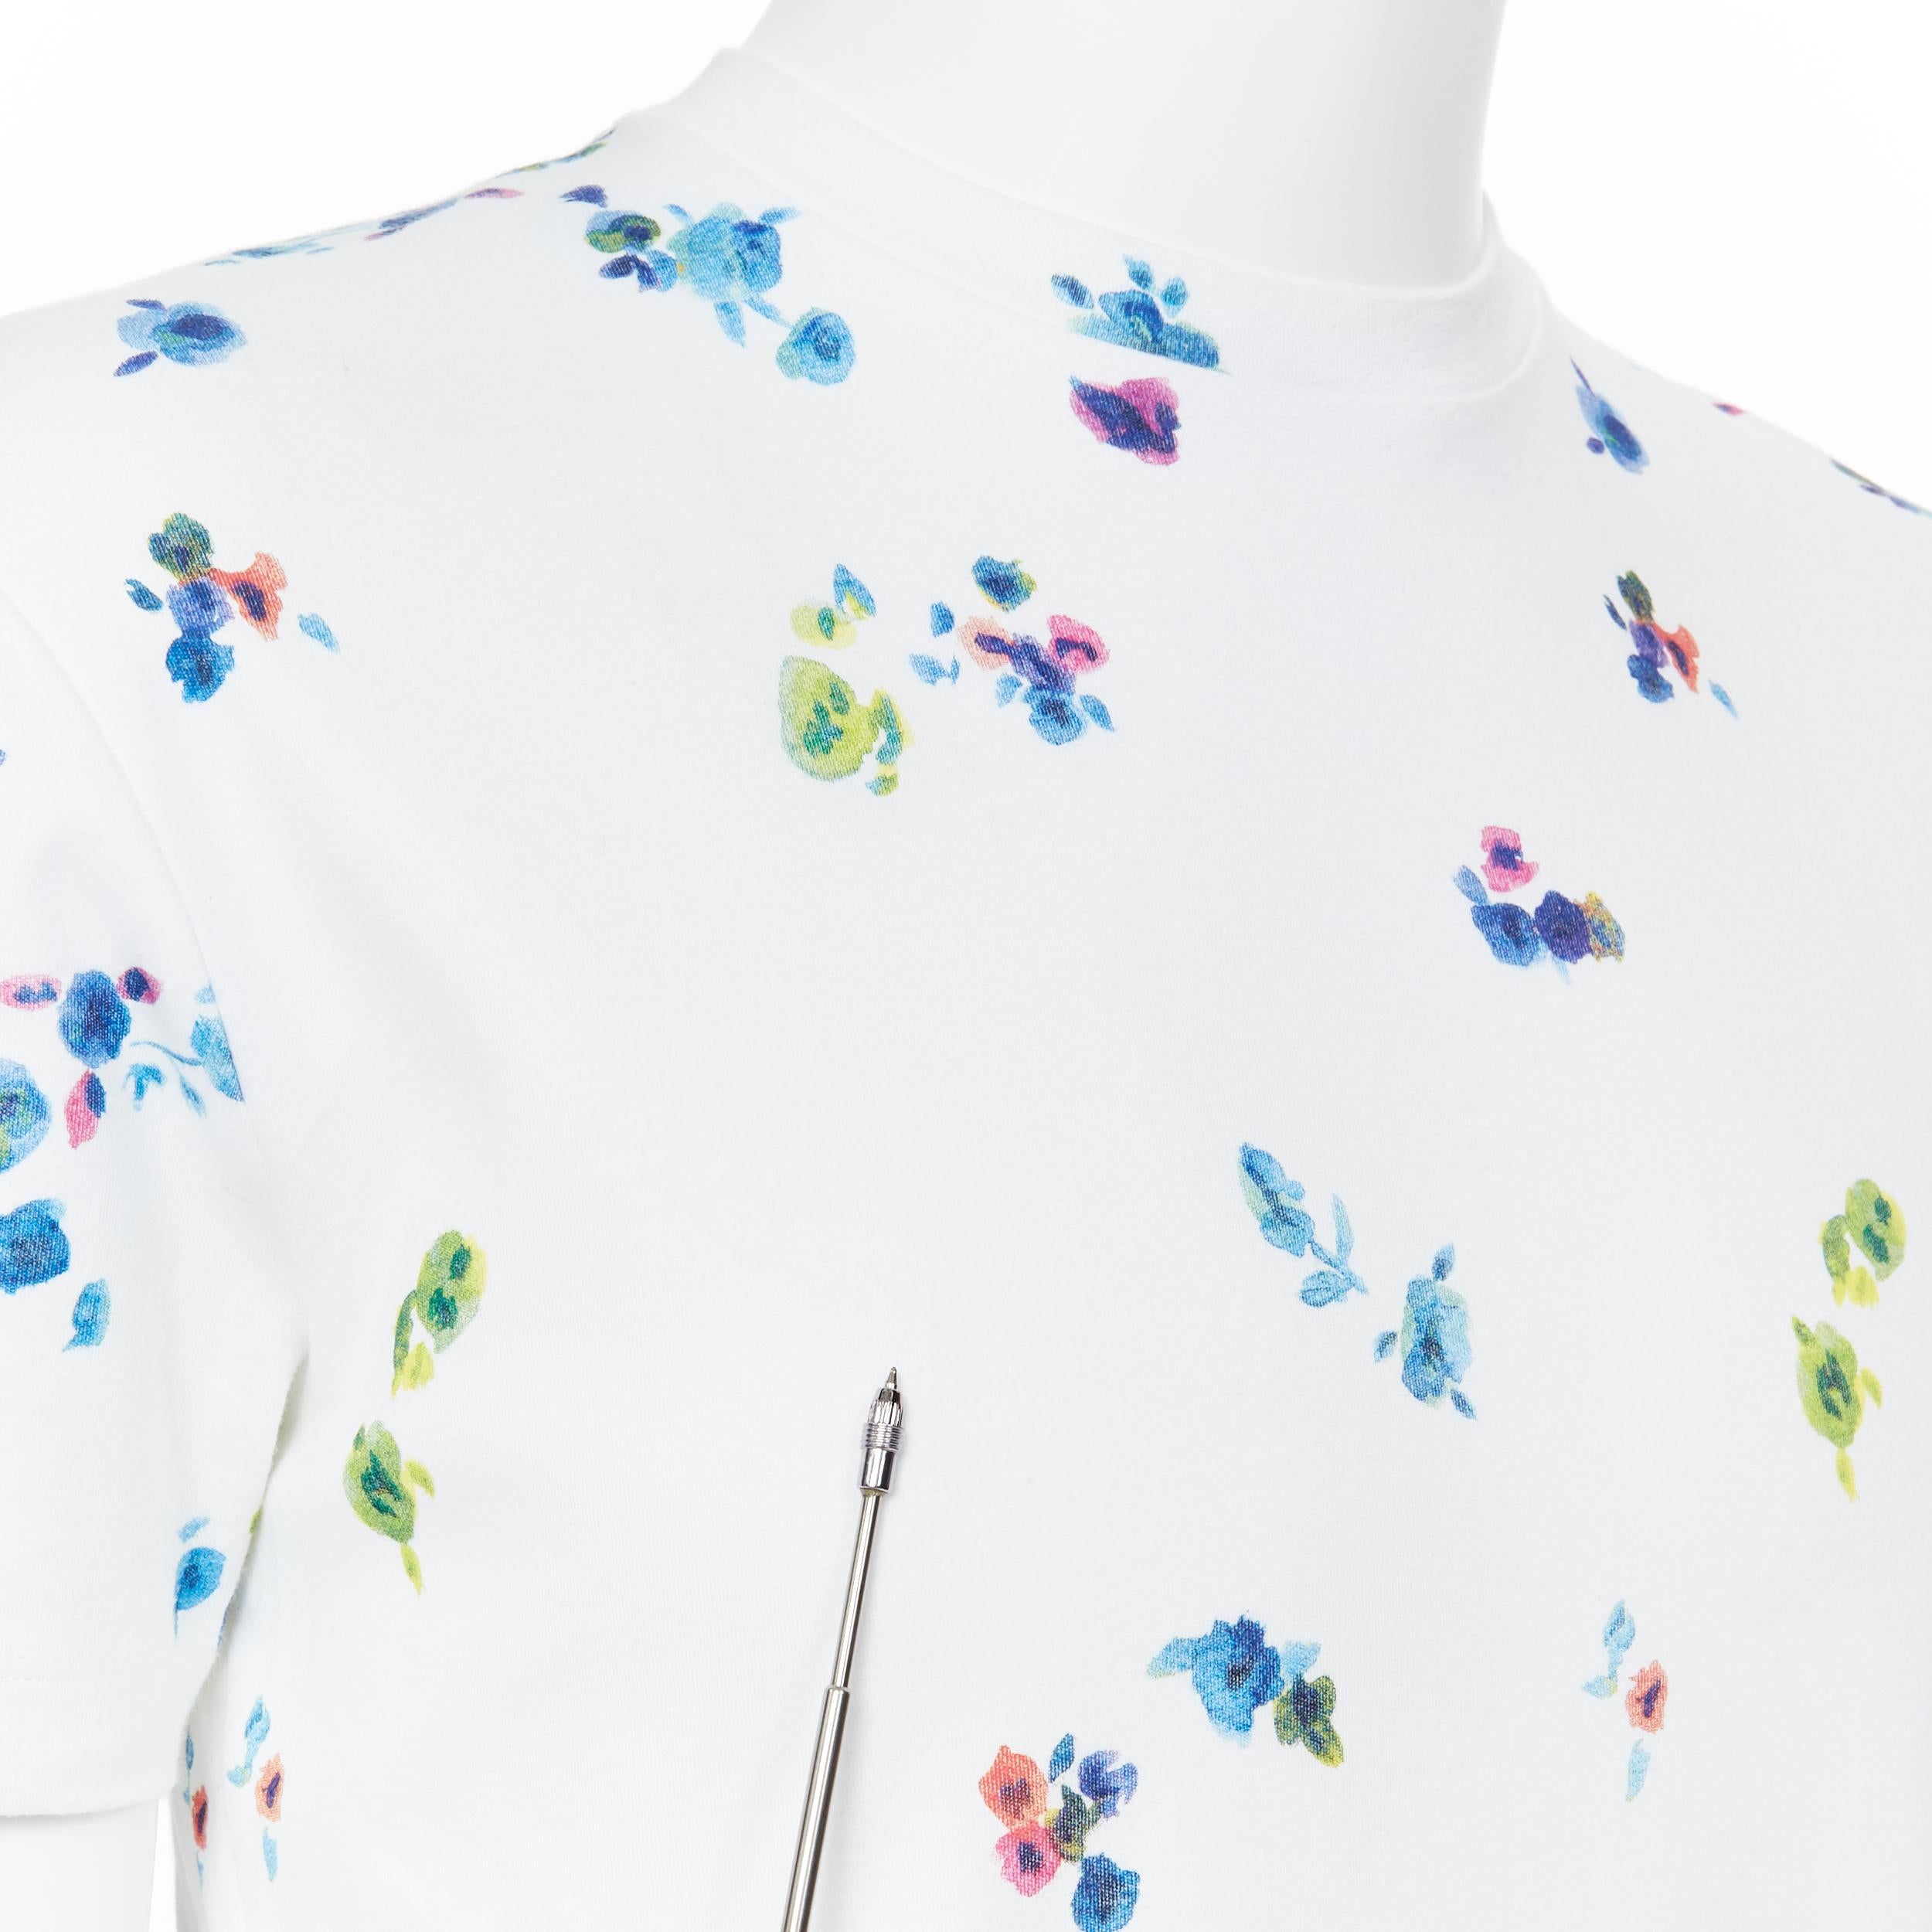 RAF SIMONS 100% white multicolor watercolor floral print short sleeve t-shirt XS
Brand: Raf Simons
Model Name / Style: T-shirt
Material: Cotton
Color: White
Pattern: Floral
Extra Detail: Short sleeve. Crew neck neckline.
Made in: